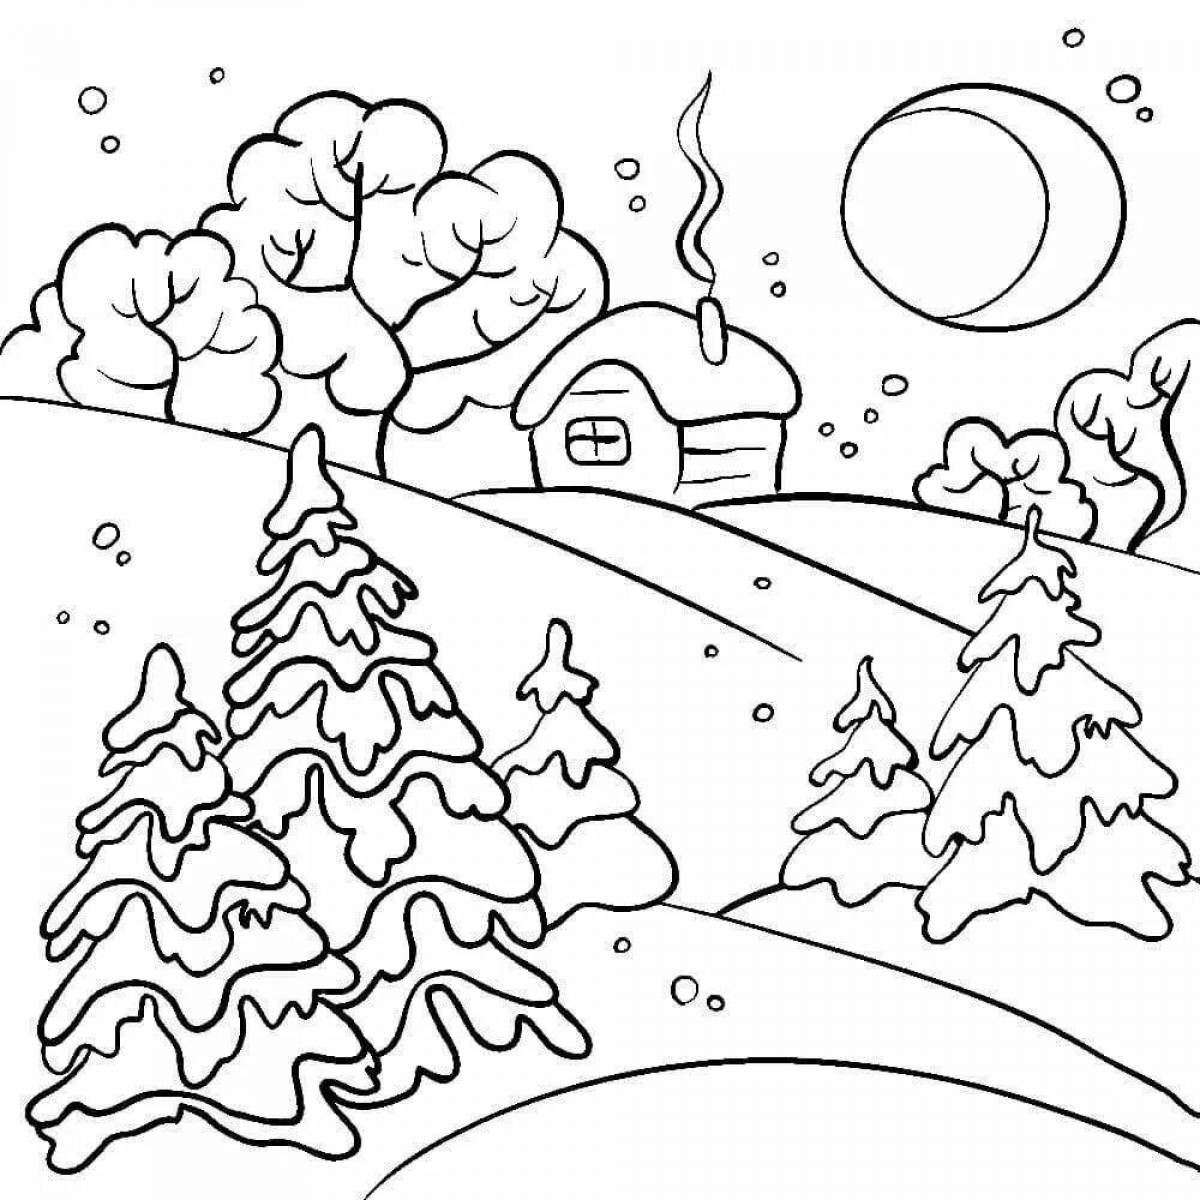 Refreshing winter landscape coloring book for kids